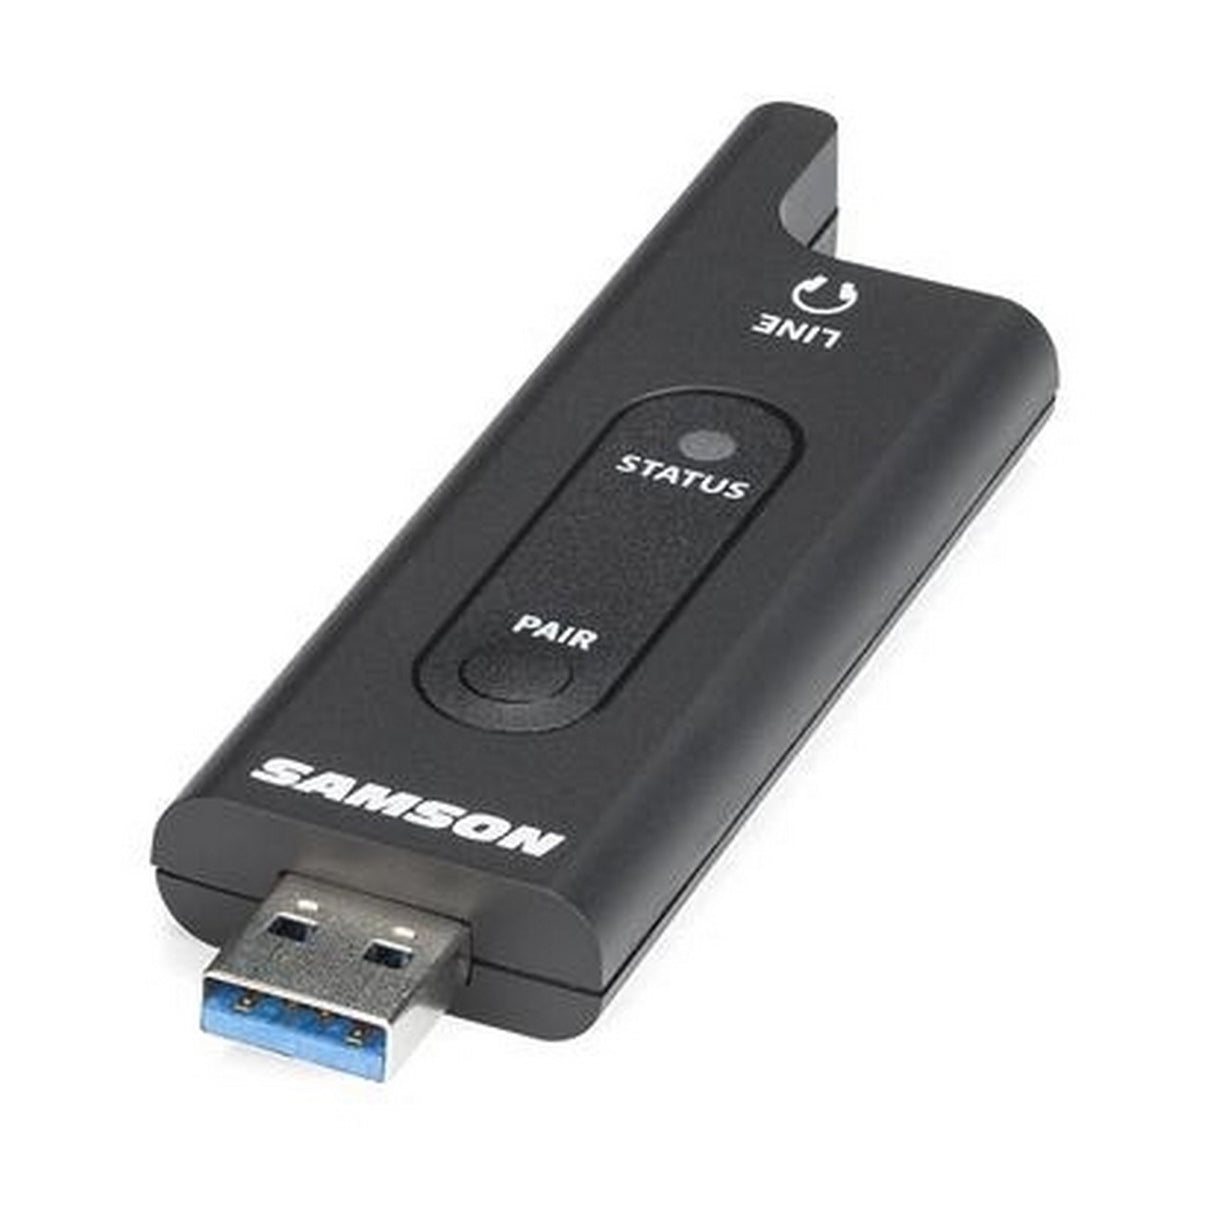 Samson RXD2 Wireless USB Receiver for Stage XPD1, XPD2, and X1U Systems